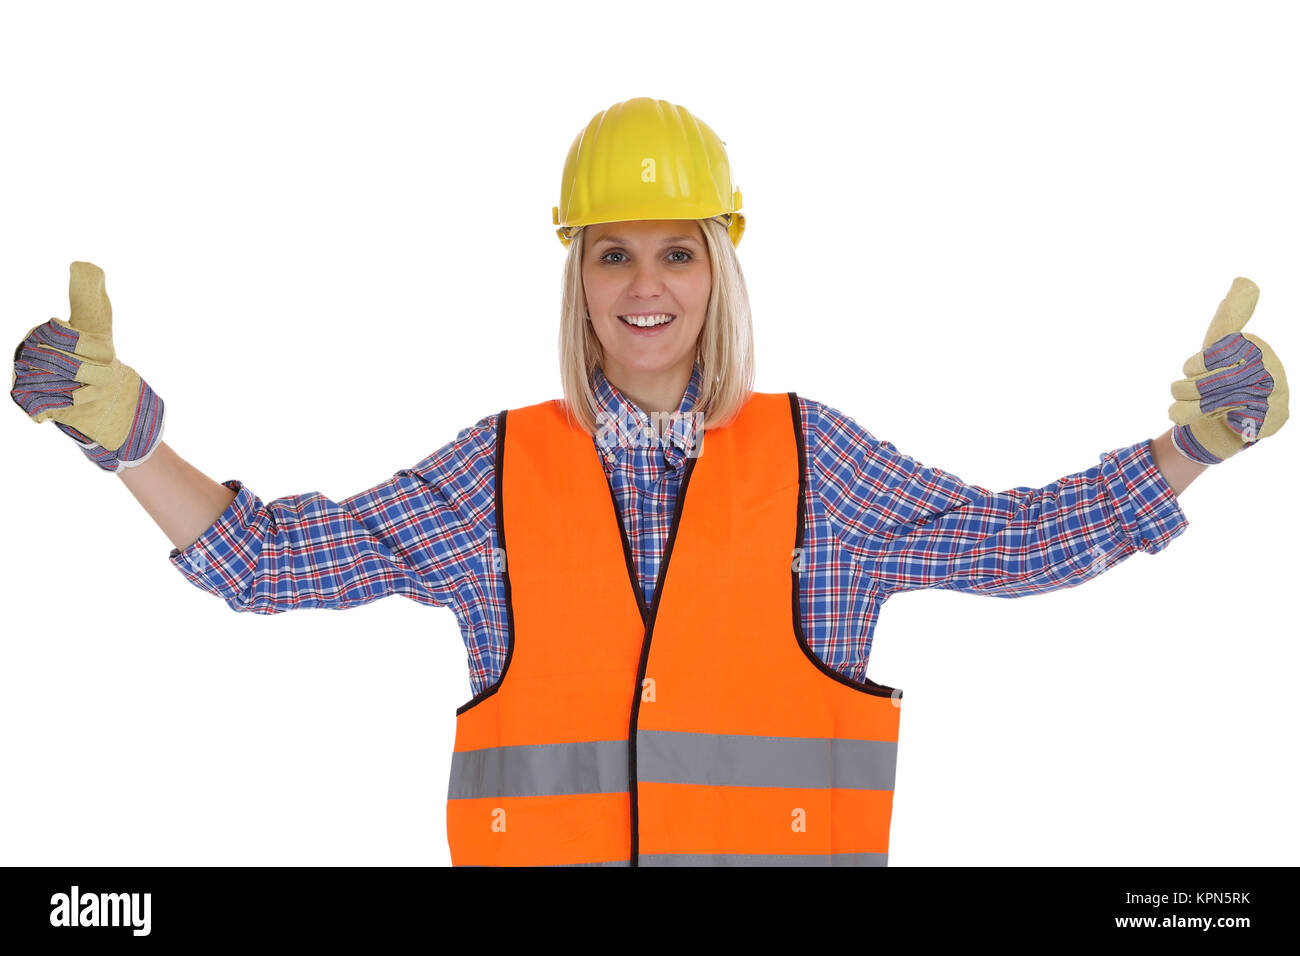 construction worker young woman construction worker construction worker thumbs up cut Stock Photo